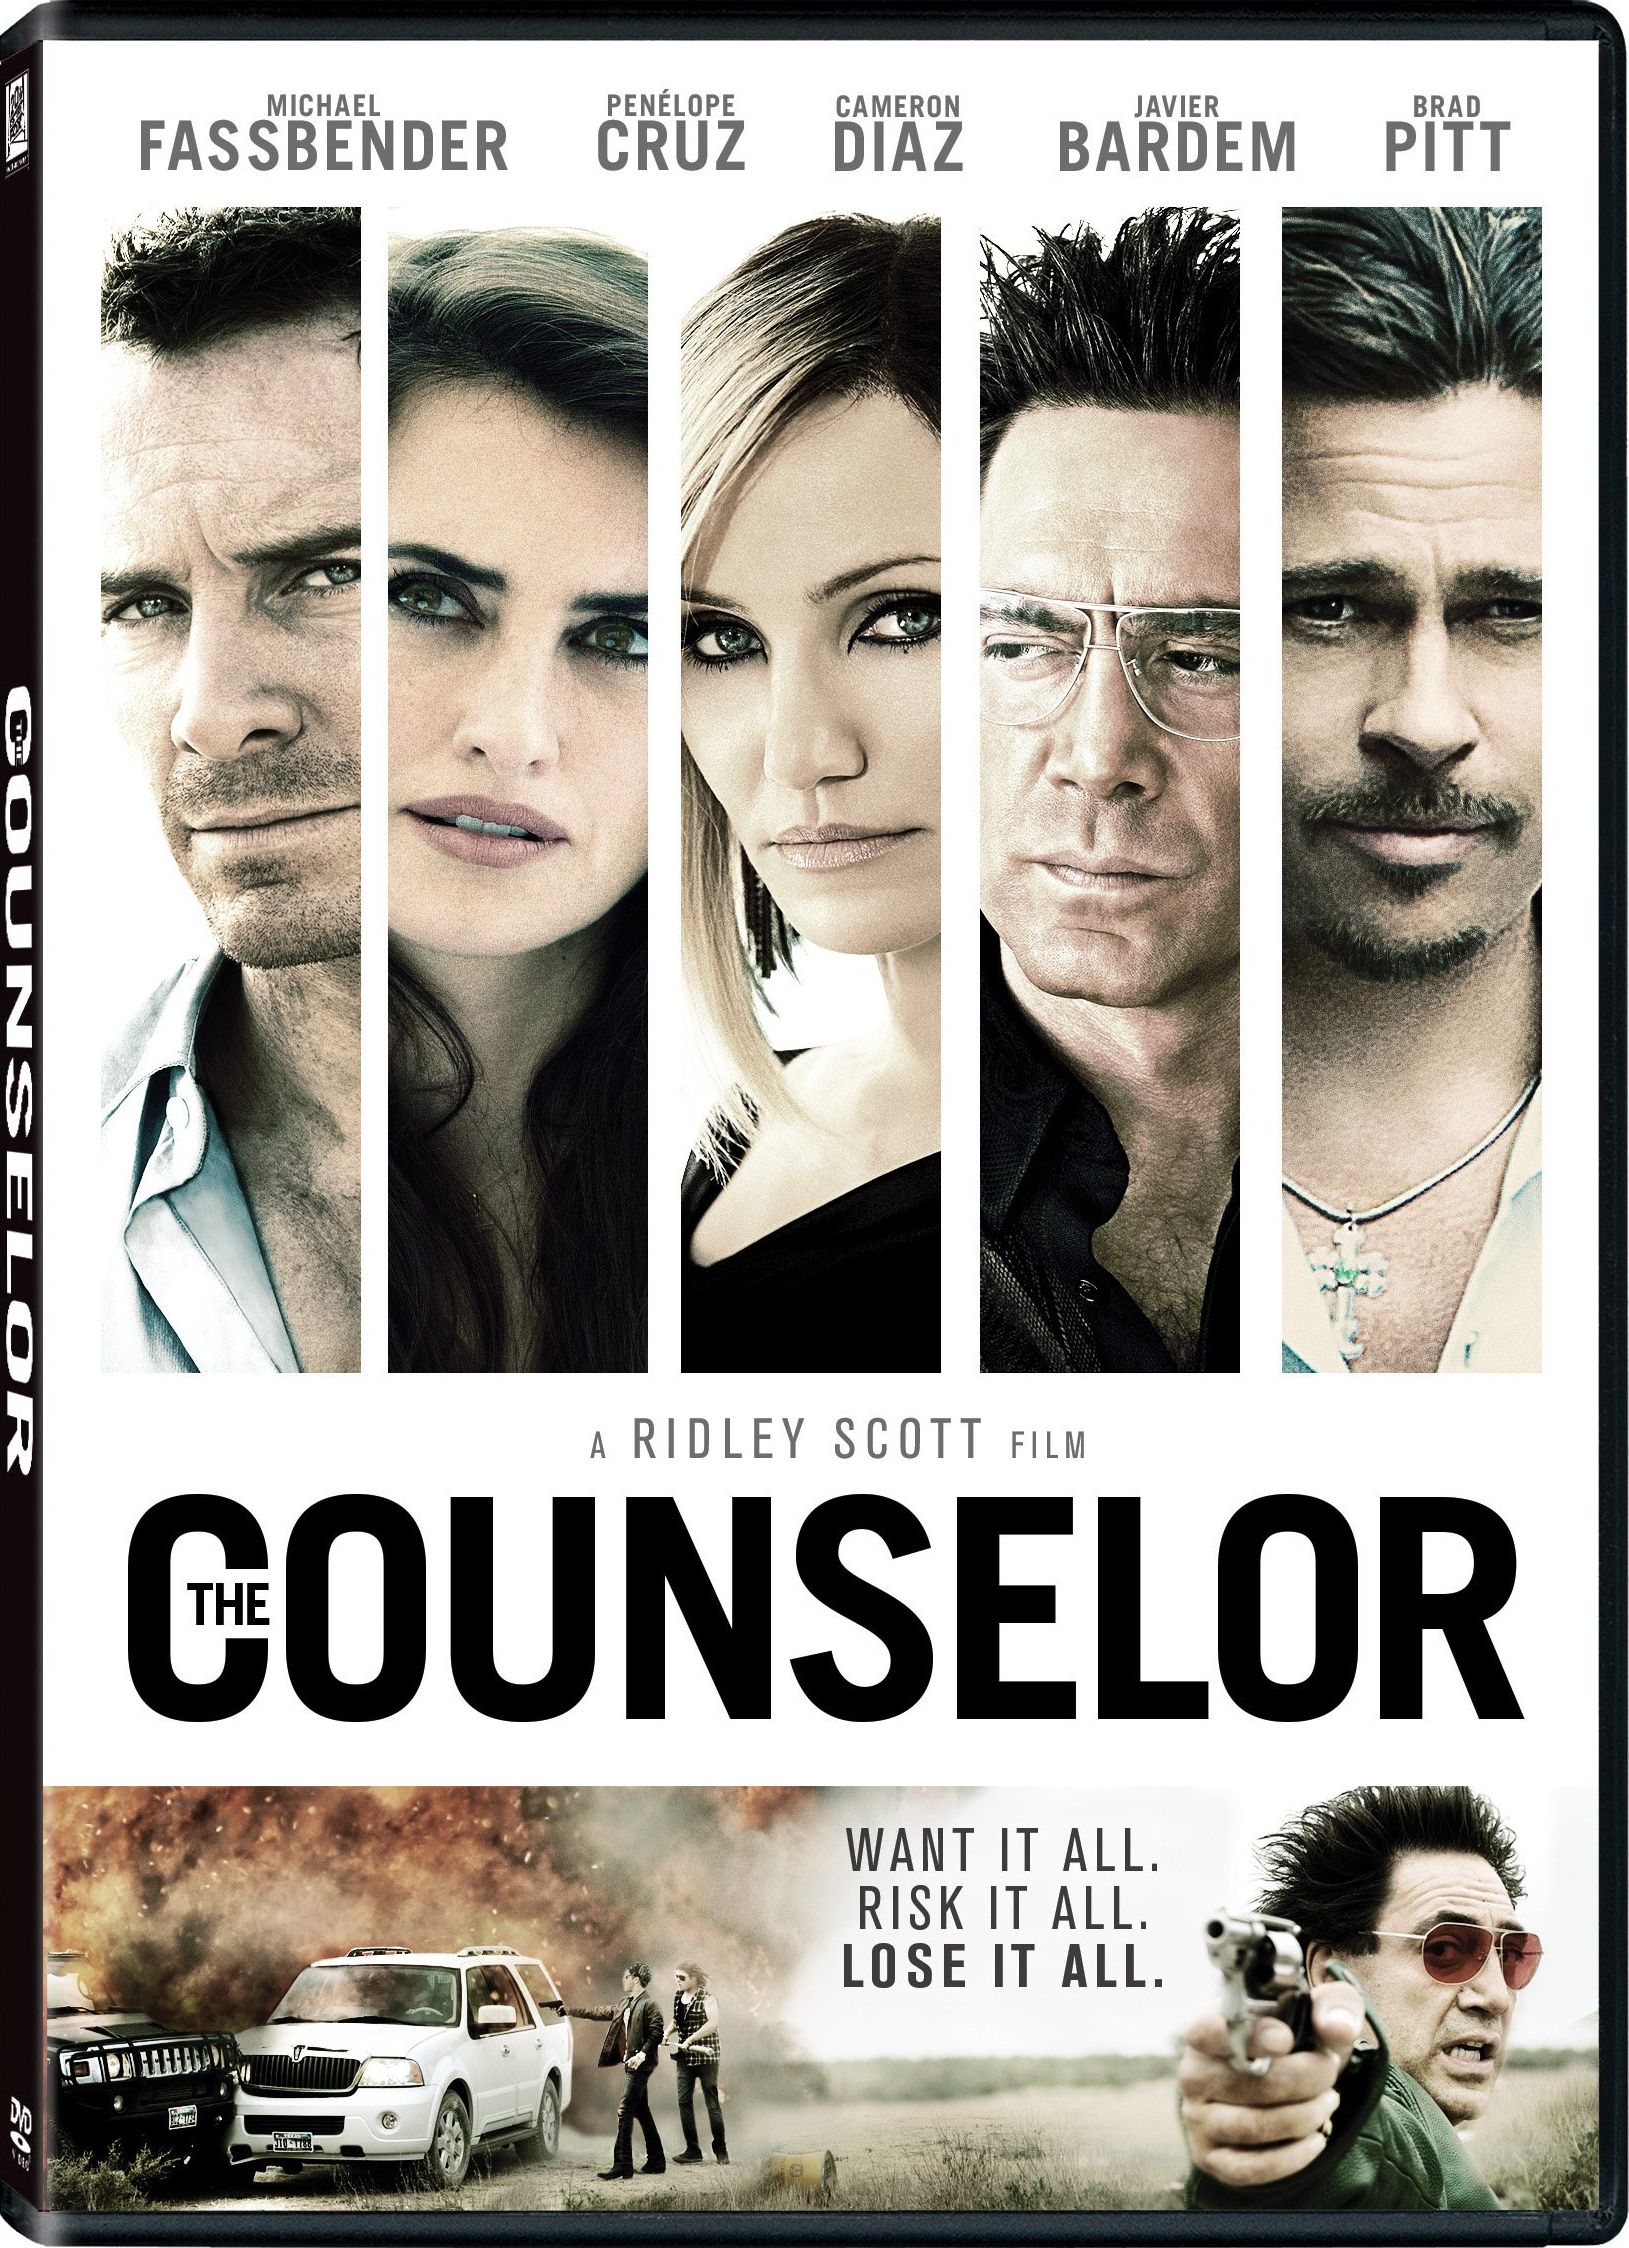 The Counselor #19